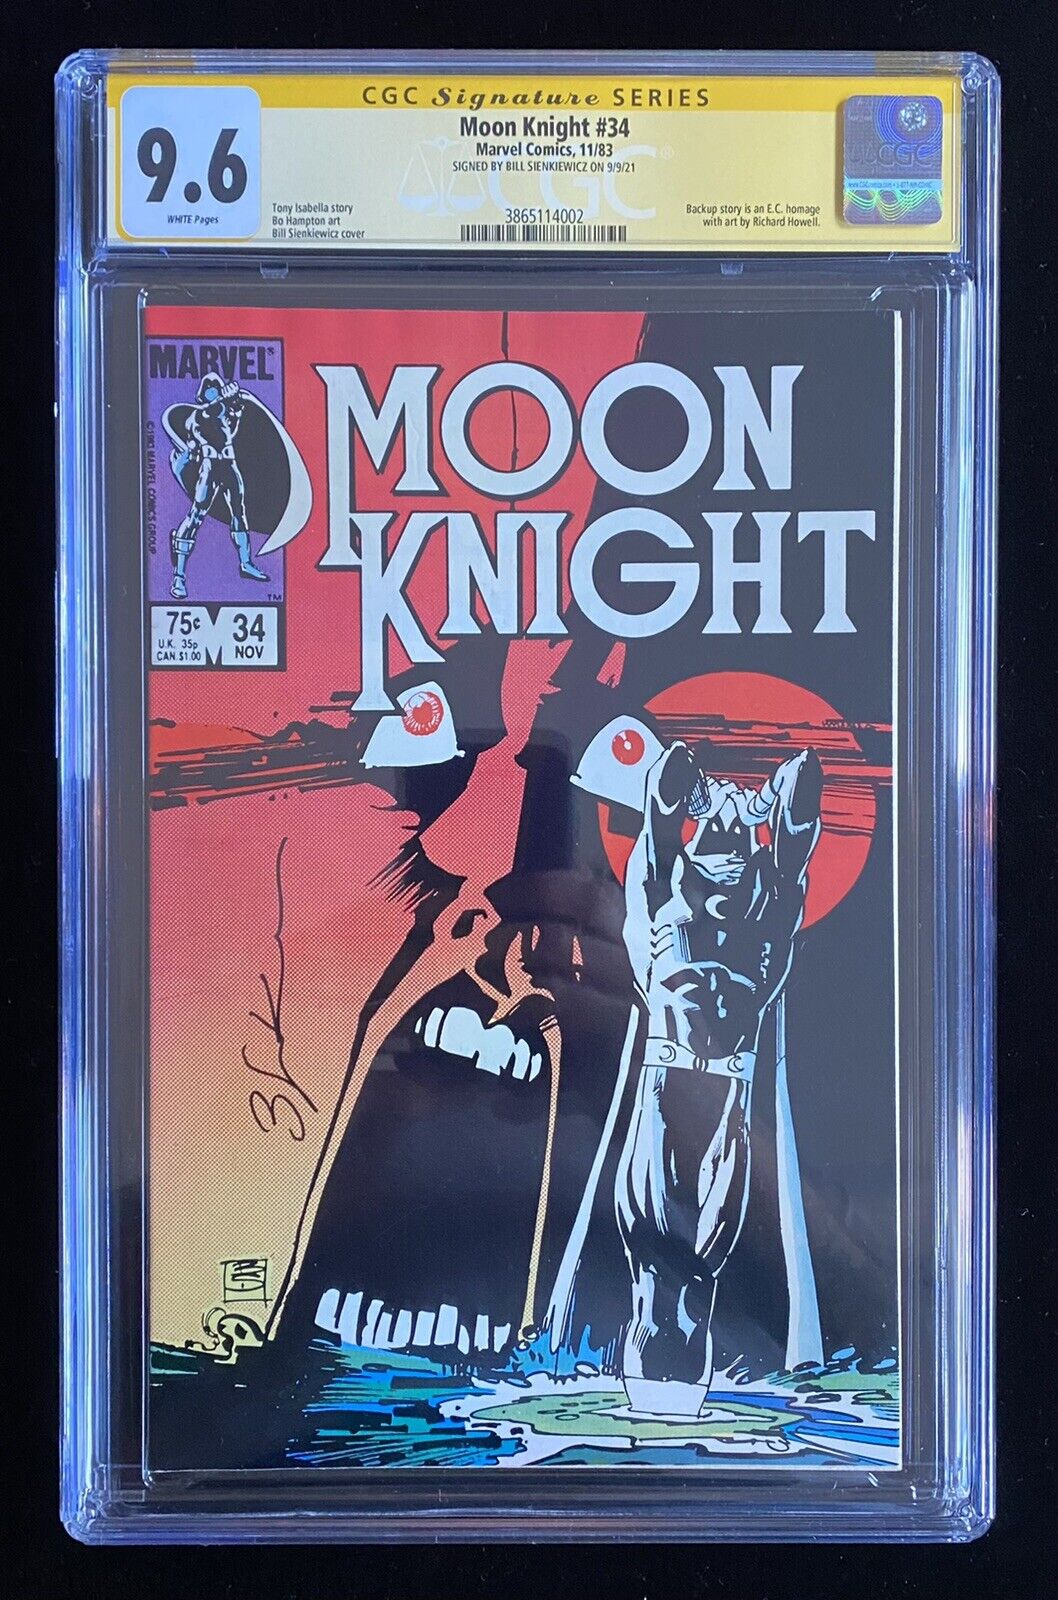 MOON KNIGHT #34 CGC 9.6 (11/83) SS Signed BILL SIENKIEWICZ WHITE PAGES 💥 🔥 💥